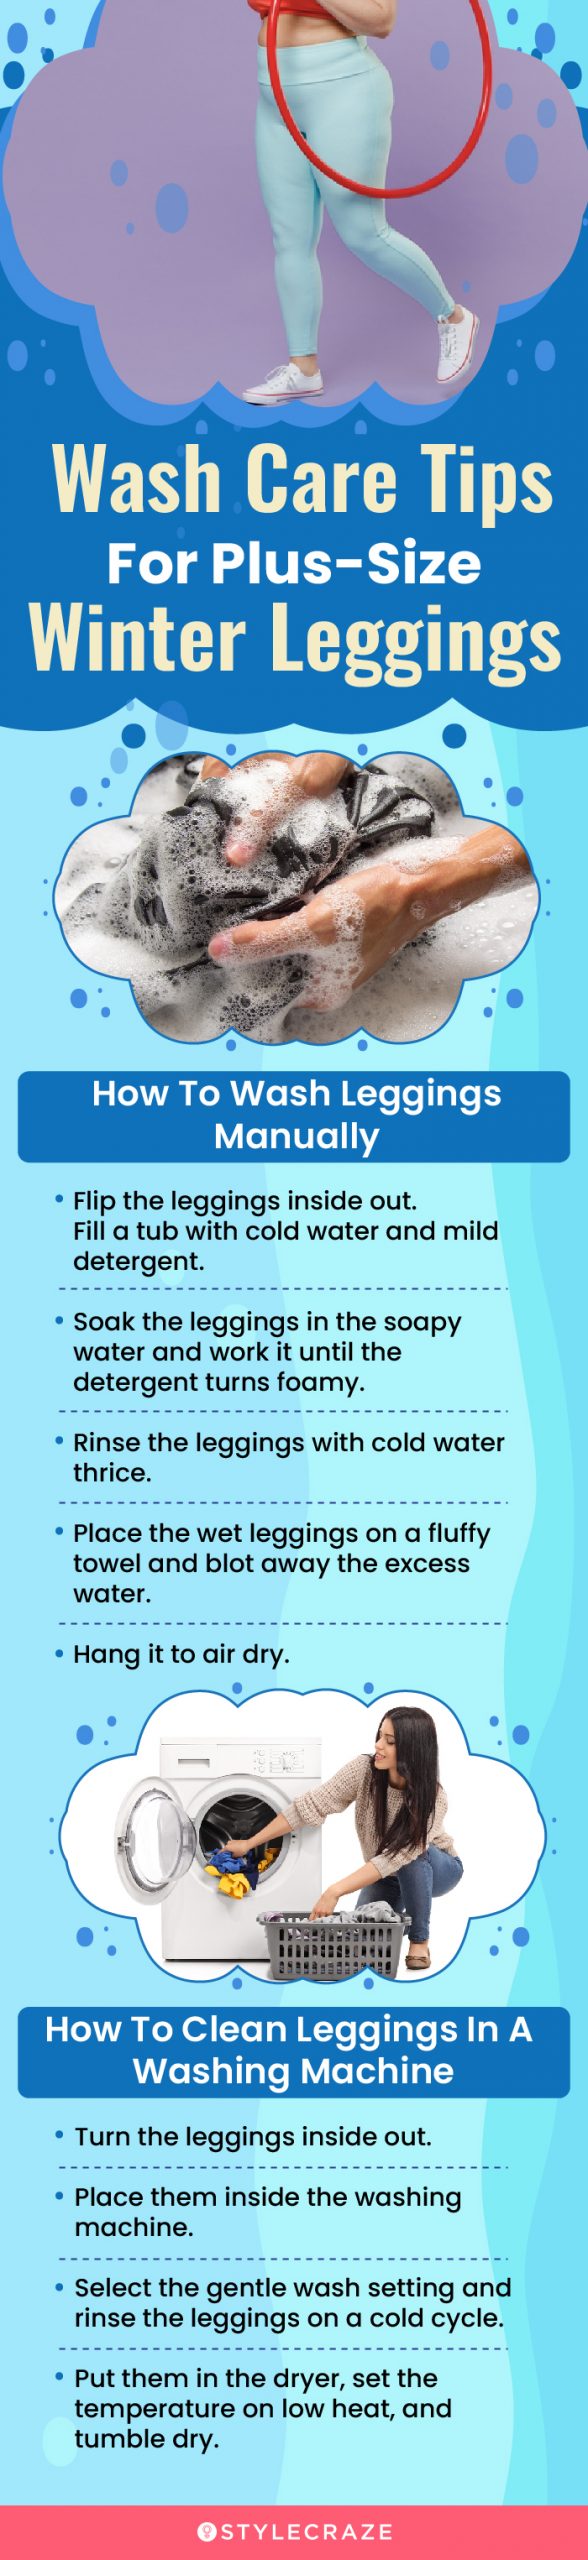 Washing Tips For Plus-Size Winter Leggings (infographic)